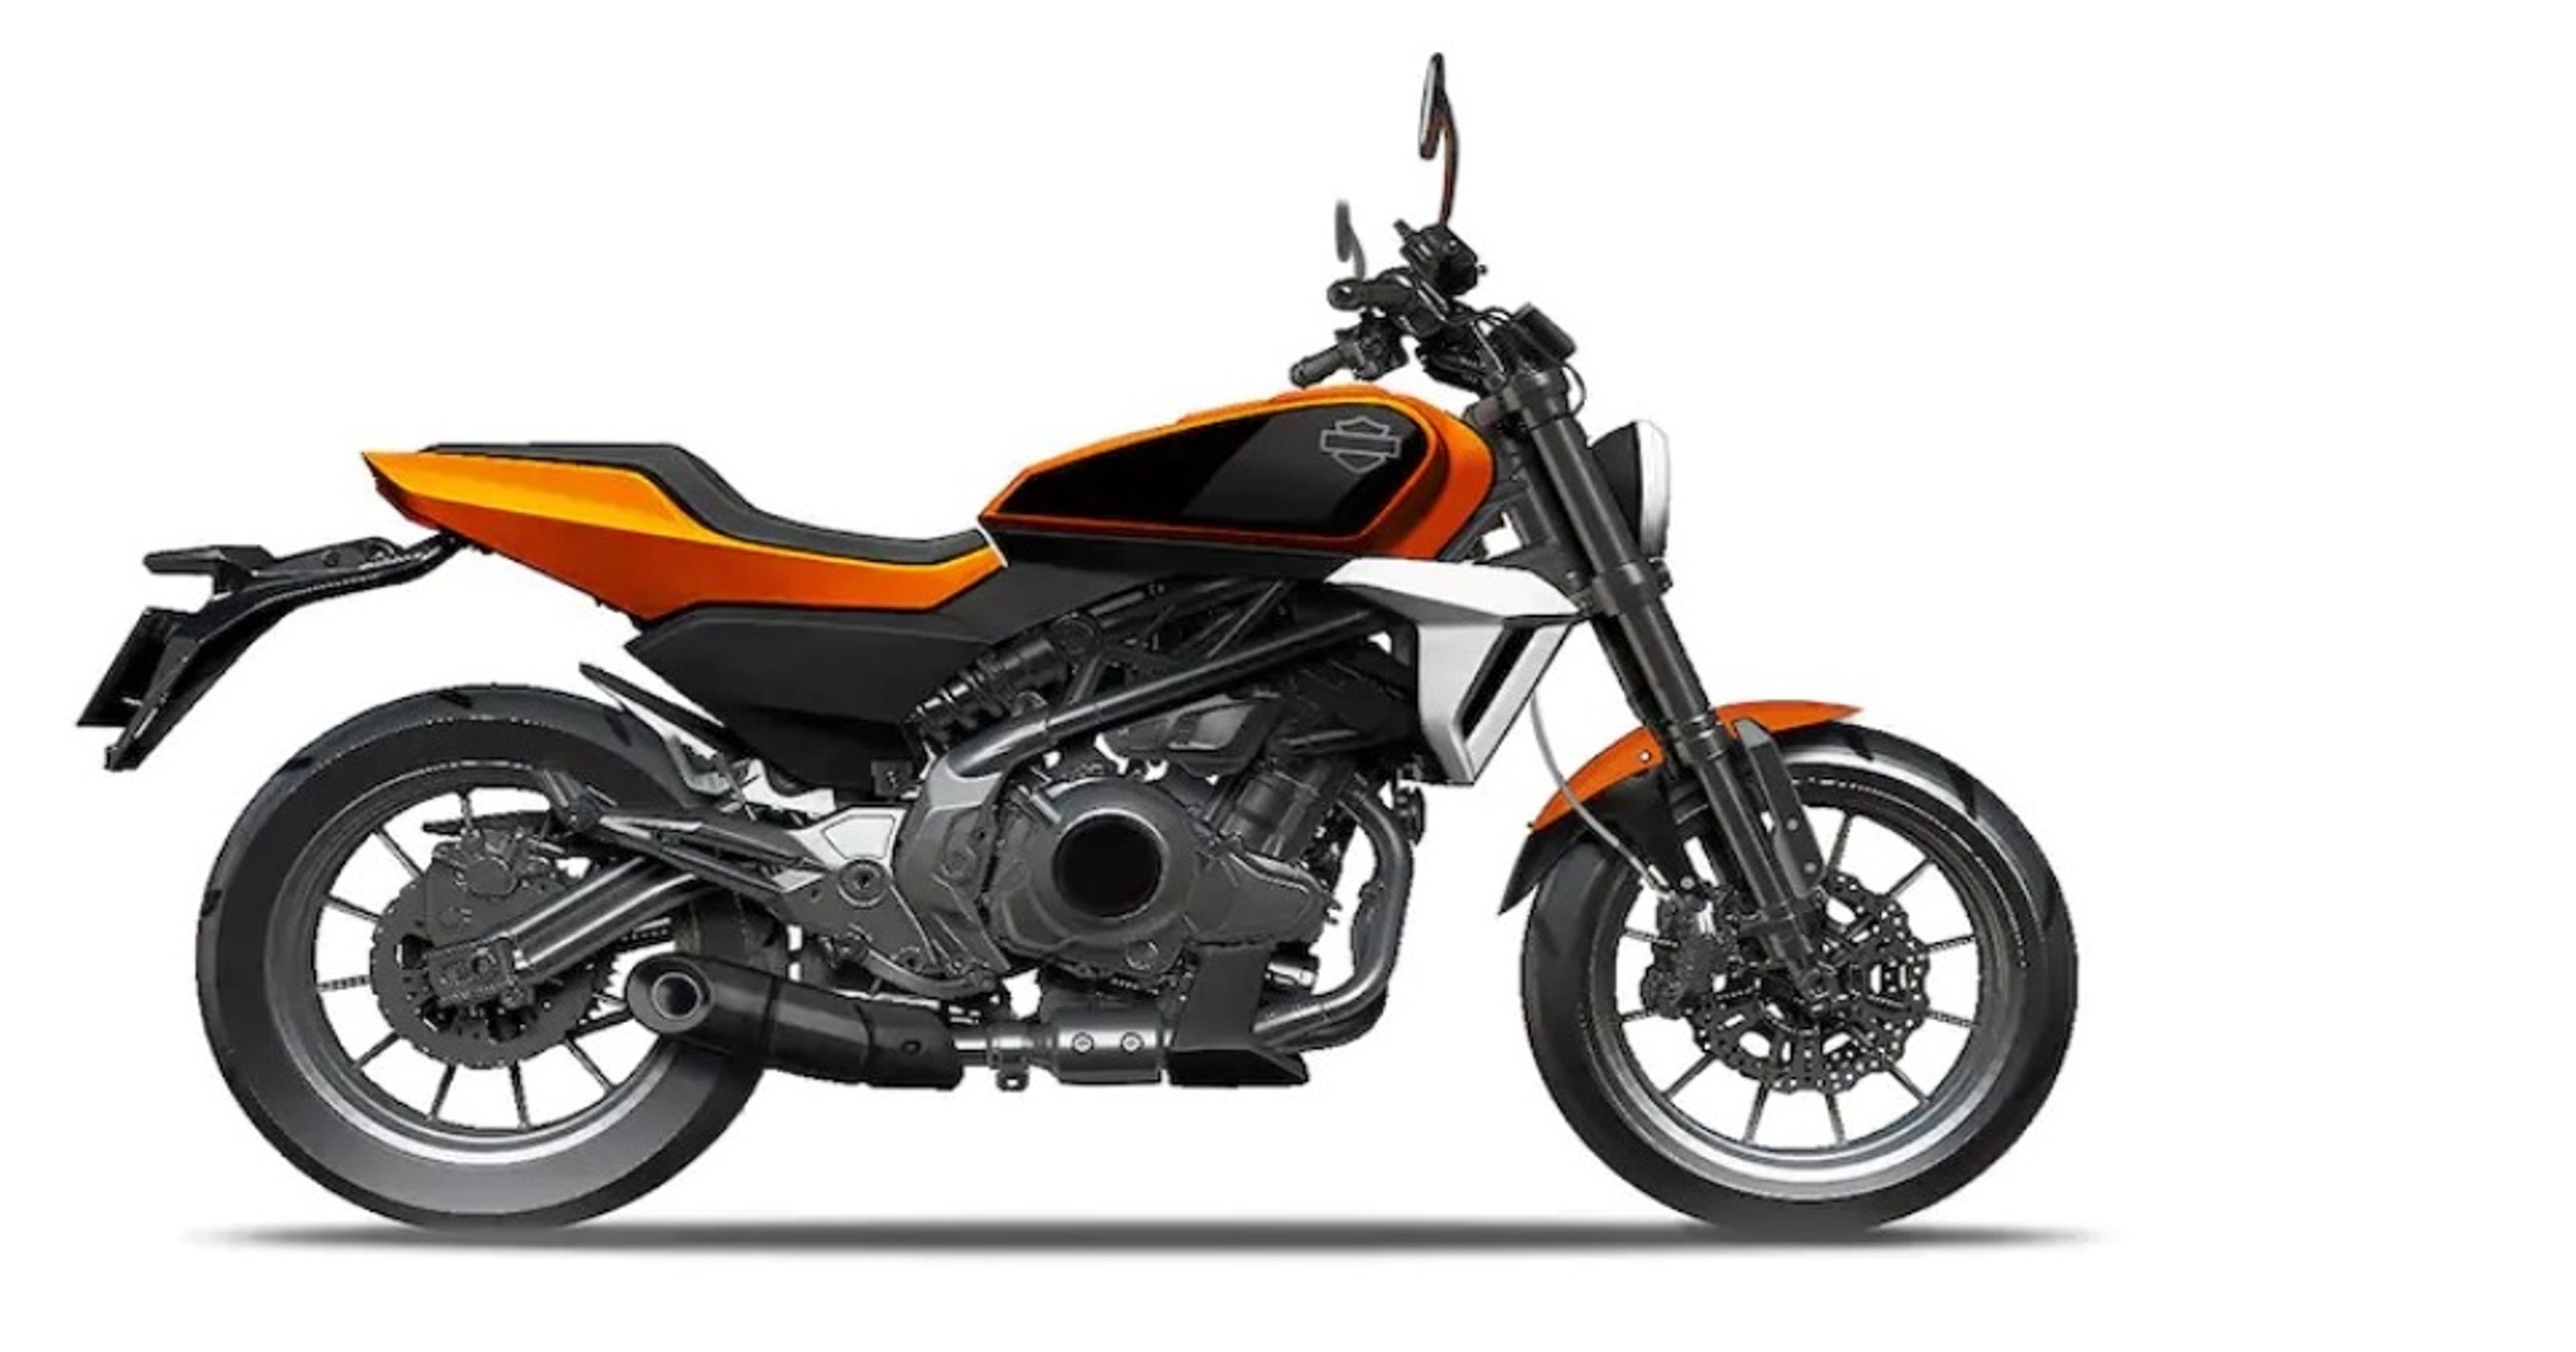  Harley  Davidson  and Chinese firm will make motorcycle for 